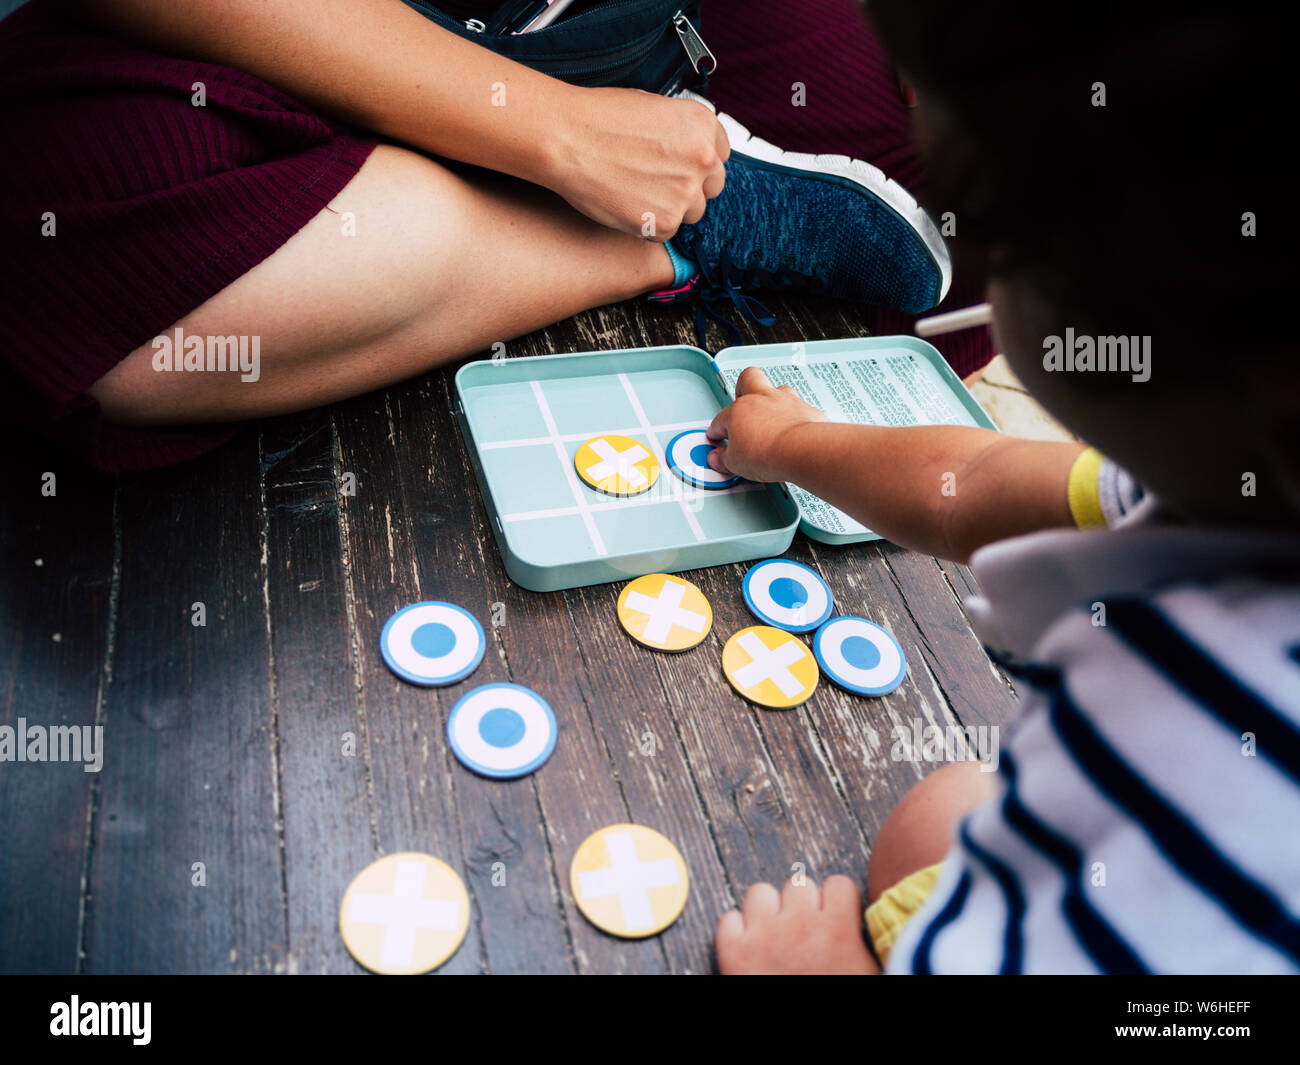 Little boy playing noughts and crosses on a wooden bench Stock Photo